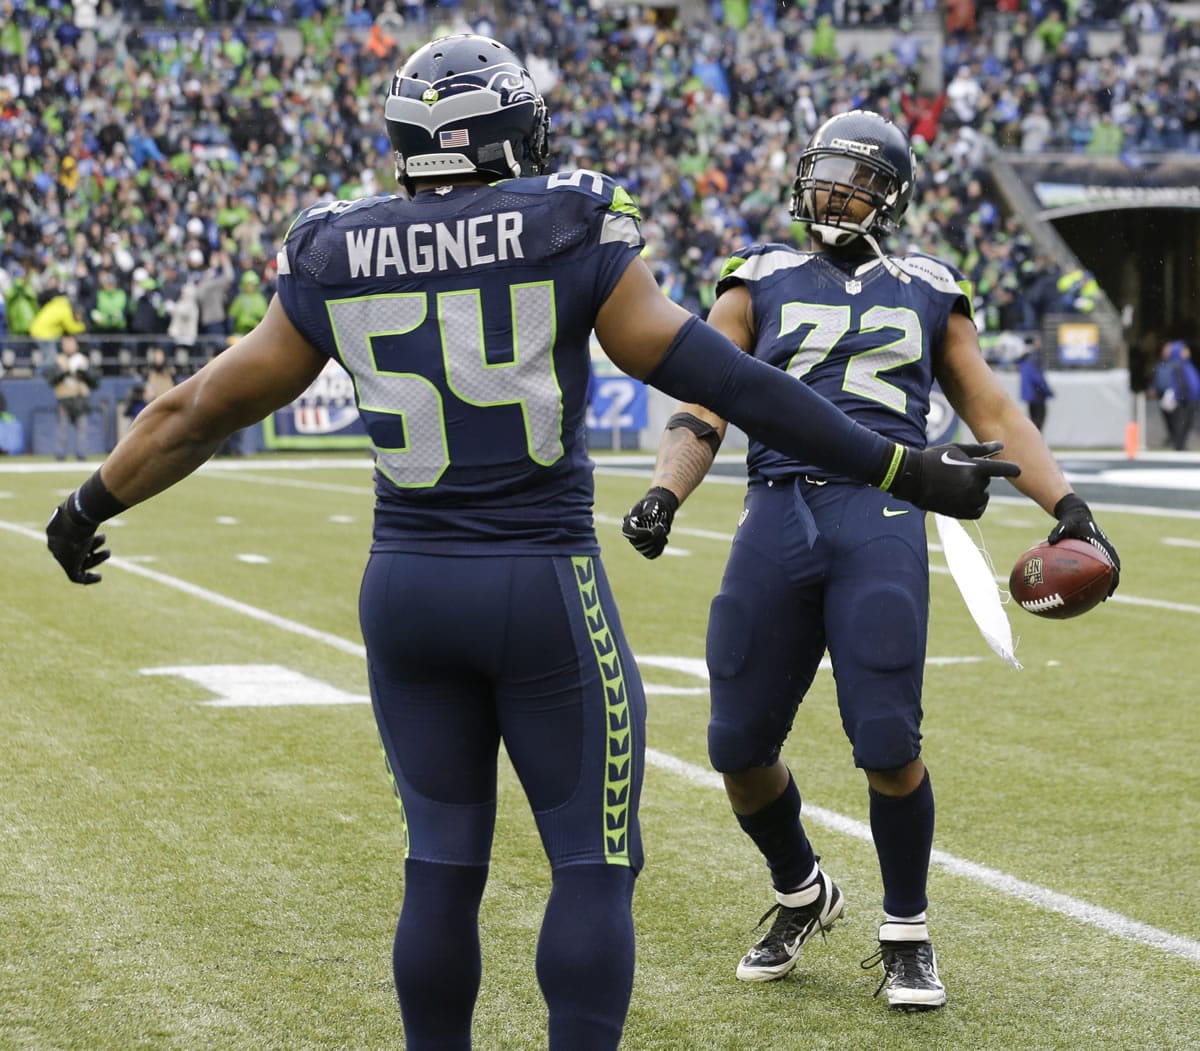 Seattle Seahawks defensive end Michael Bennett, right, celebrates after recovering a fumble, with middle linebacker Bobby Wagner during the first half of an NFC divisional playoff NFL football game against the New Orleans Saints in Seattle, Saturday, Jan. 11, 2014.